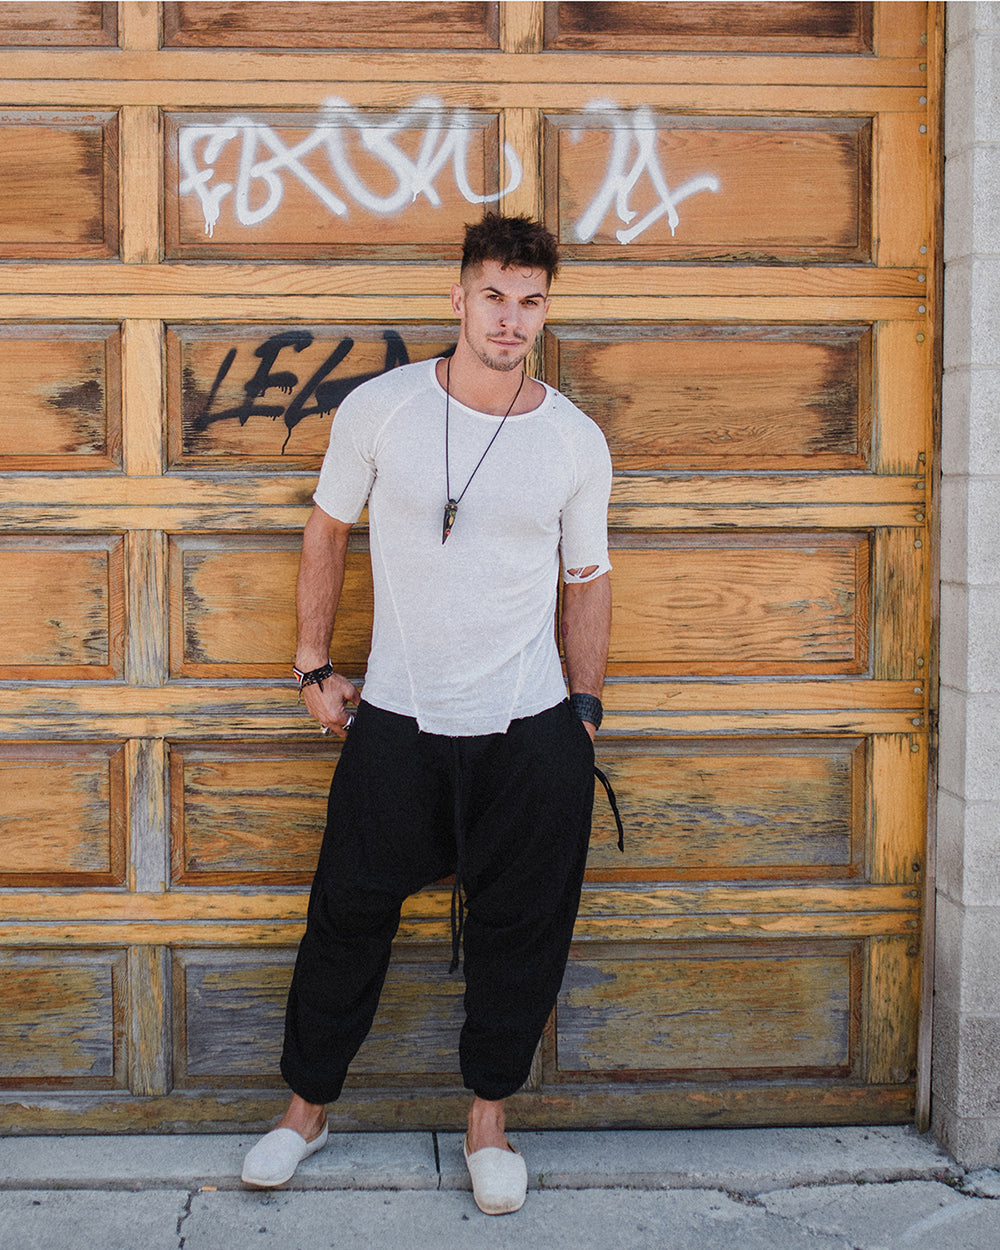 Mens Yoga Pants - The Most Comfortable Pants You'll Ever Own!